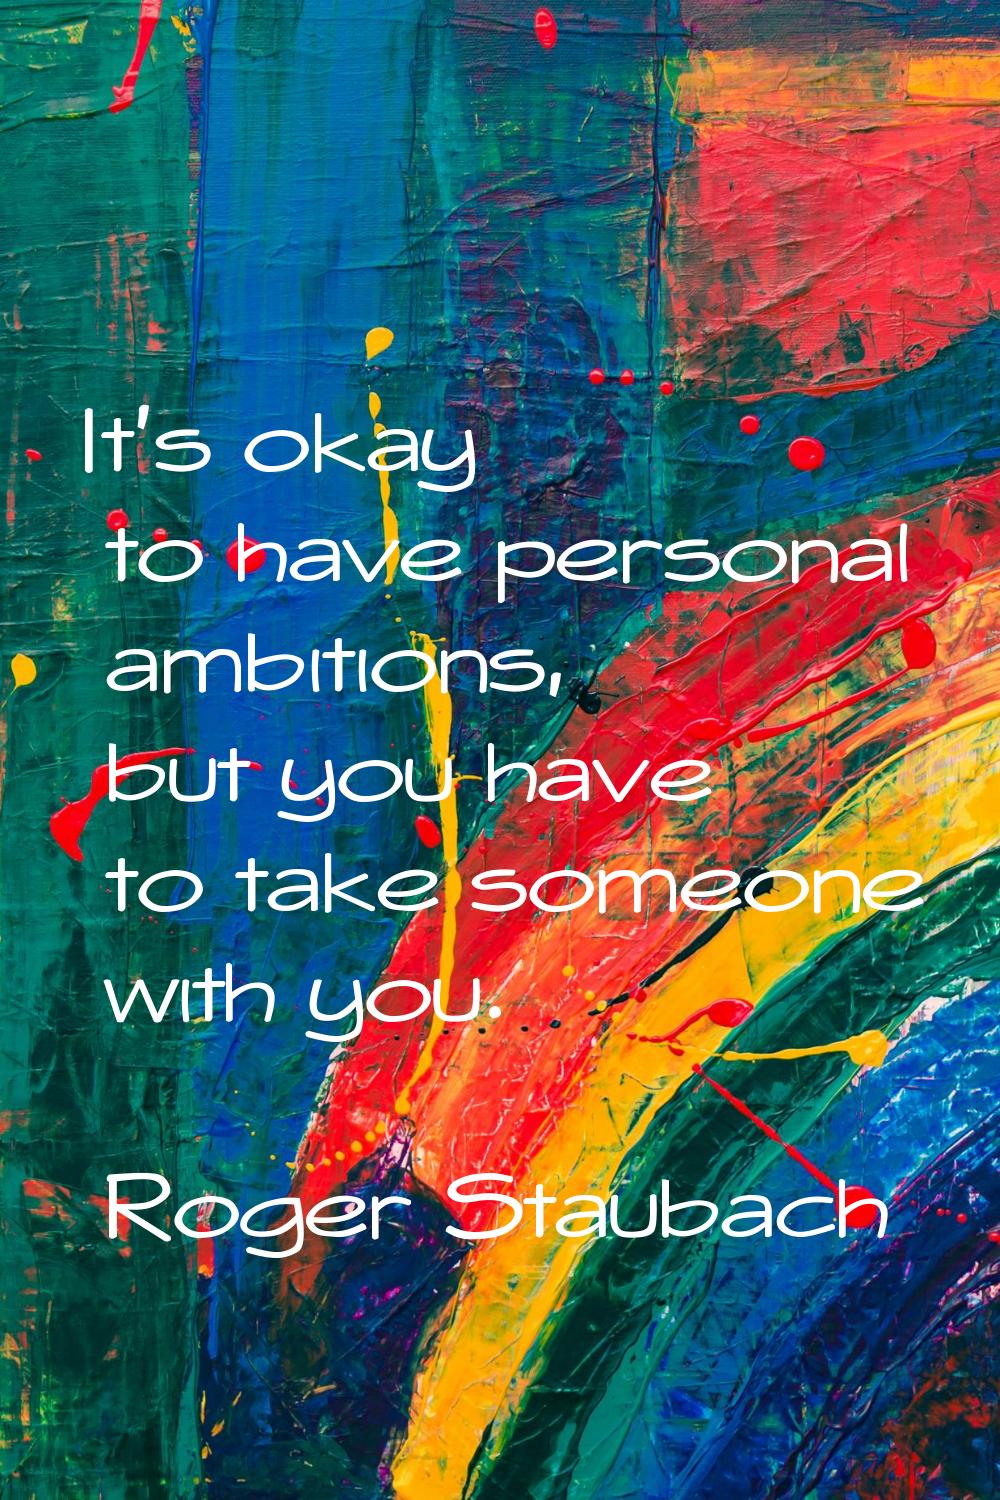 It's okay to have personal ambitions, but you have to take someone with you.